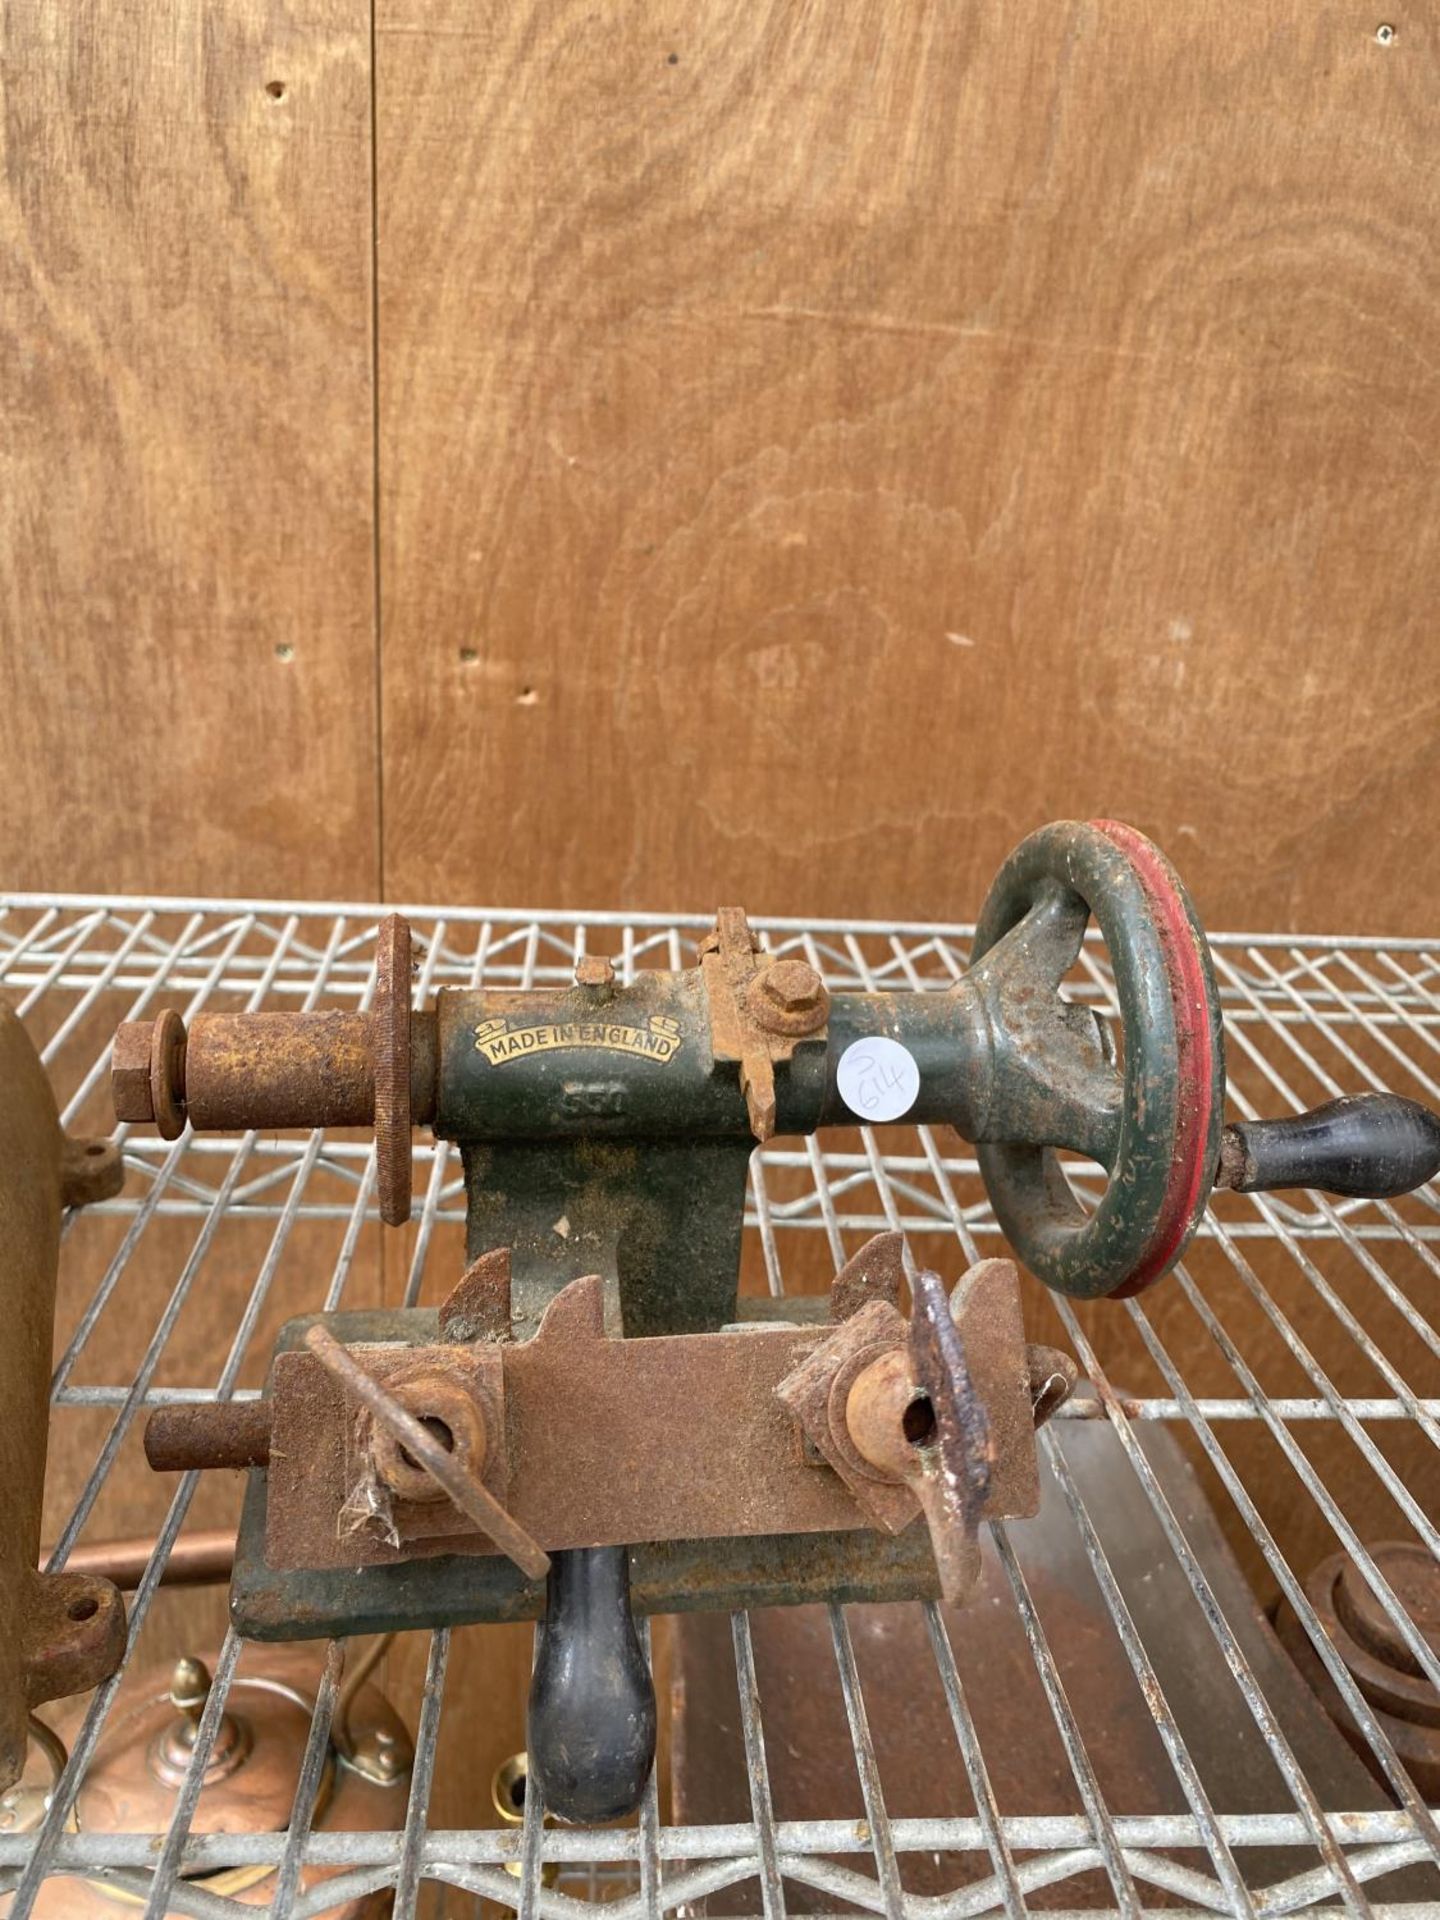 A VINTAGE LATHE HANDLE AND PULLEY SYSTEM - Image 3 of 3